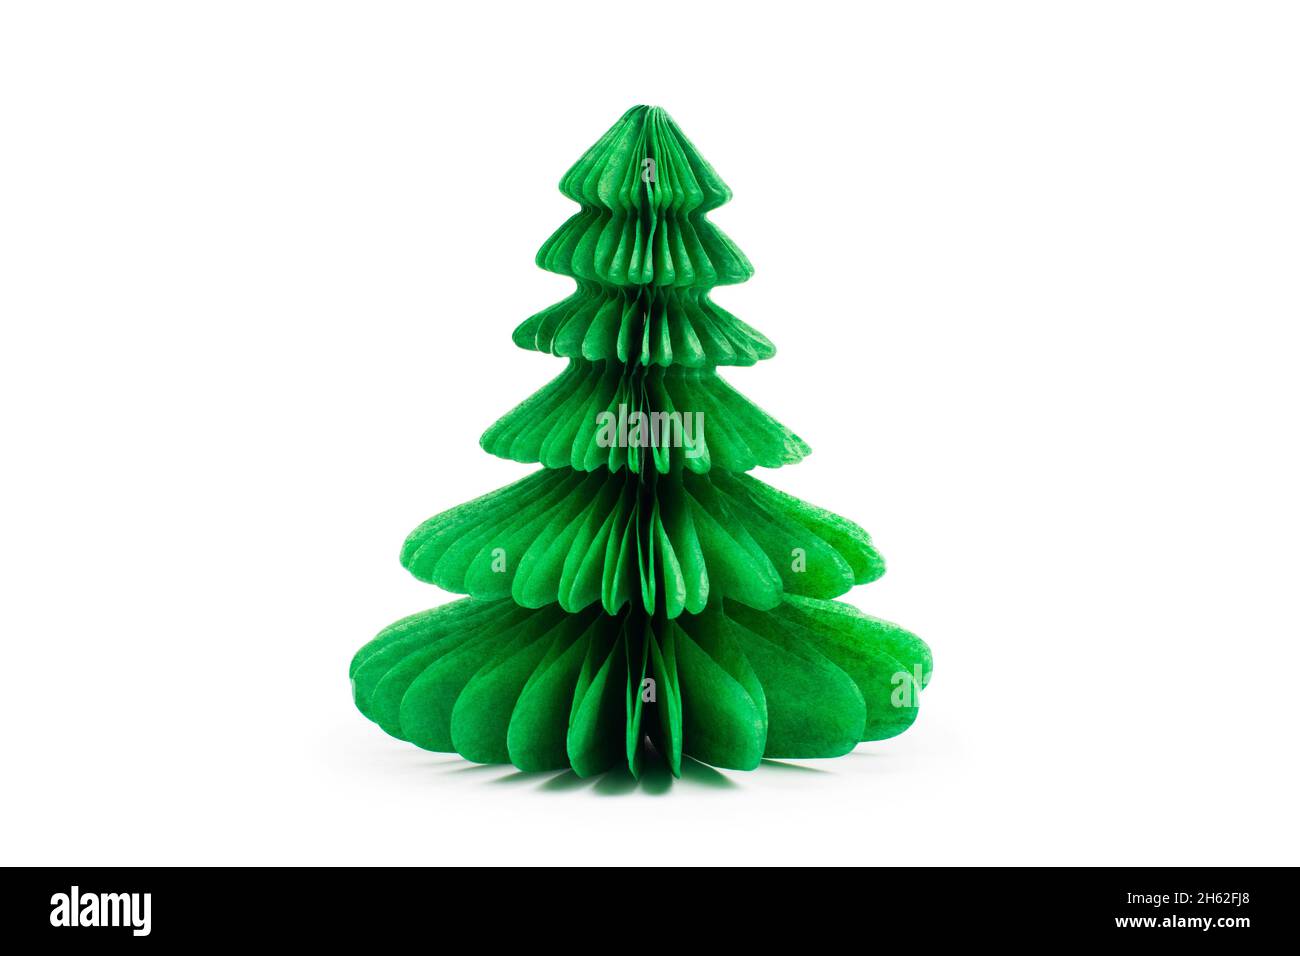 Handmade Christmas tree cut out from green paper on white background Stock Photo